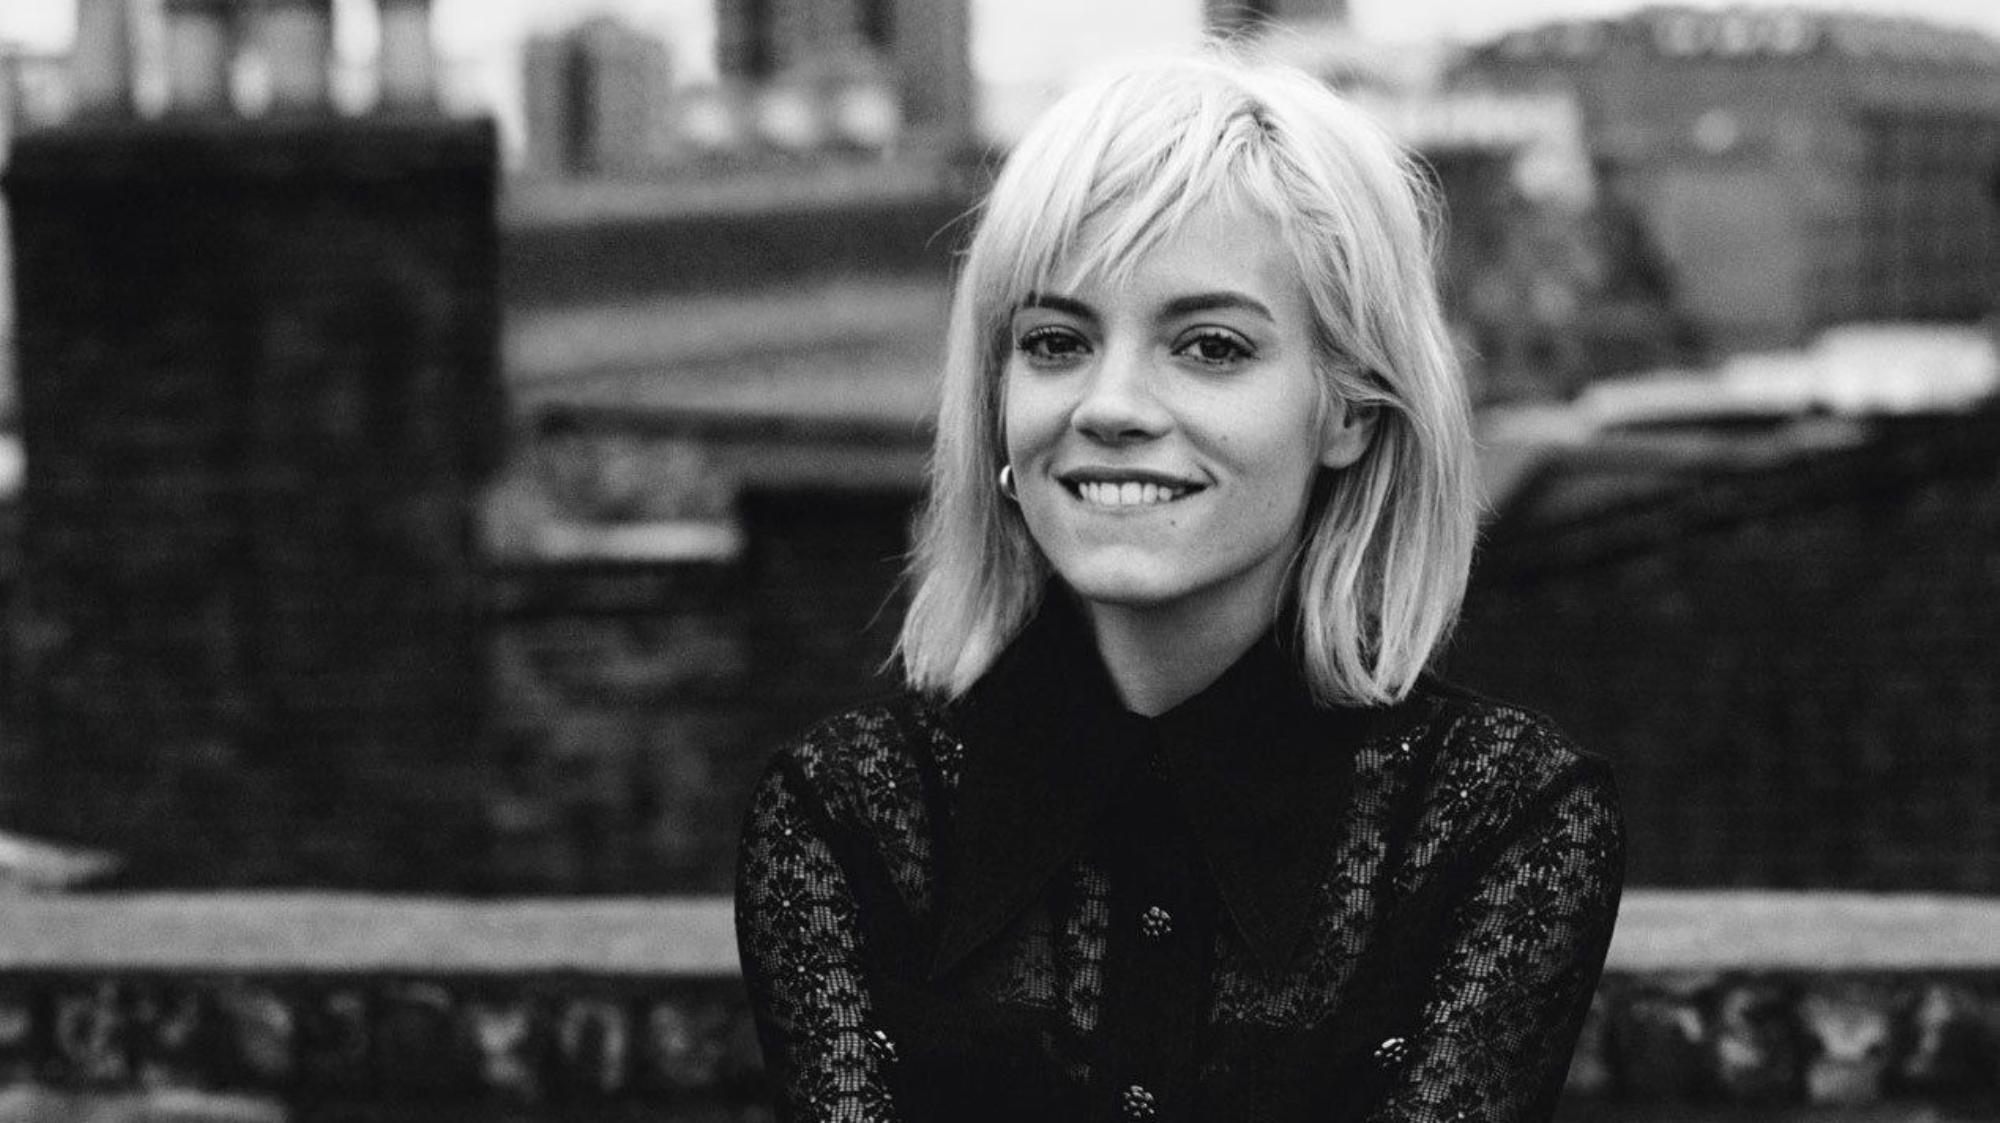 10-things-you-didnt-know-about-lily-allen-1424883027